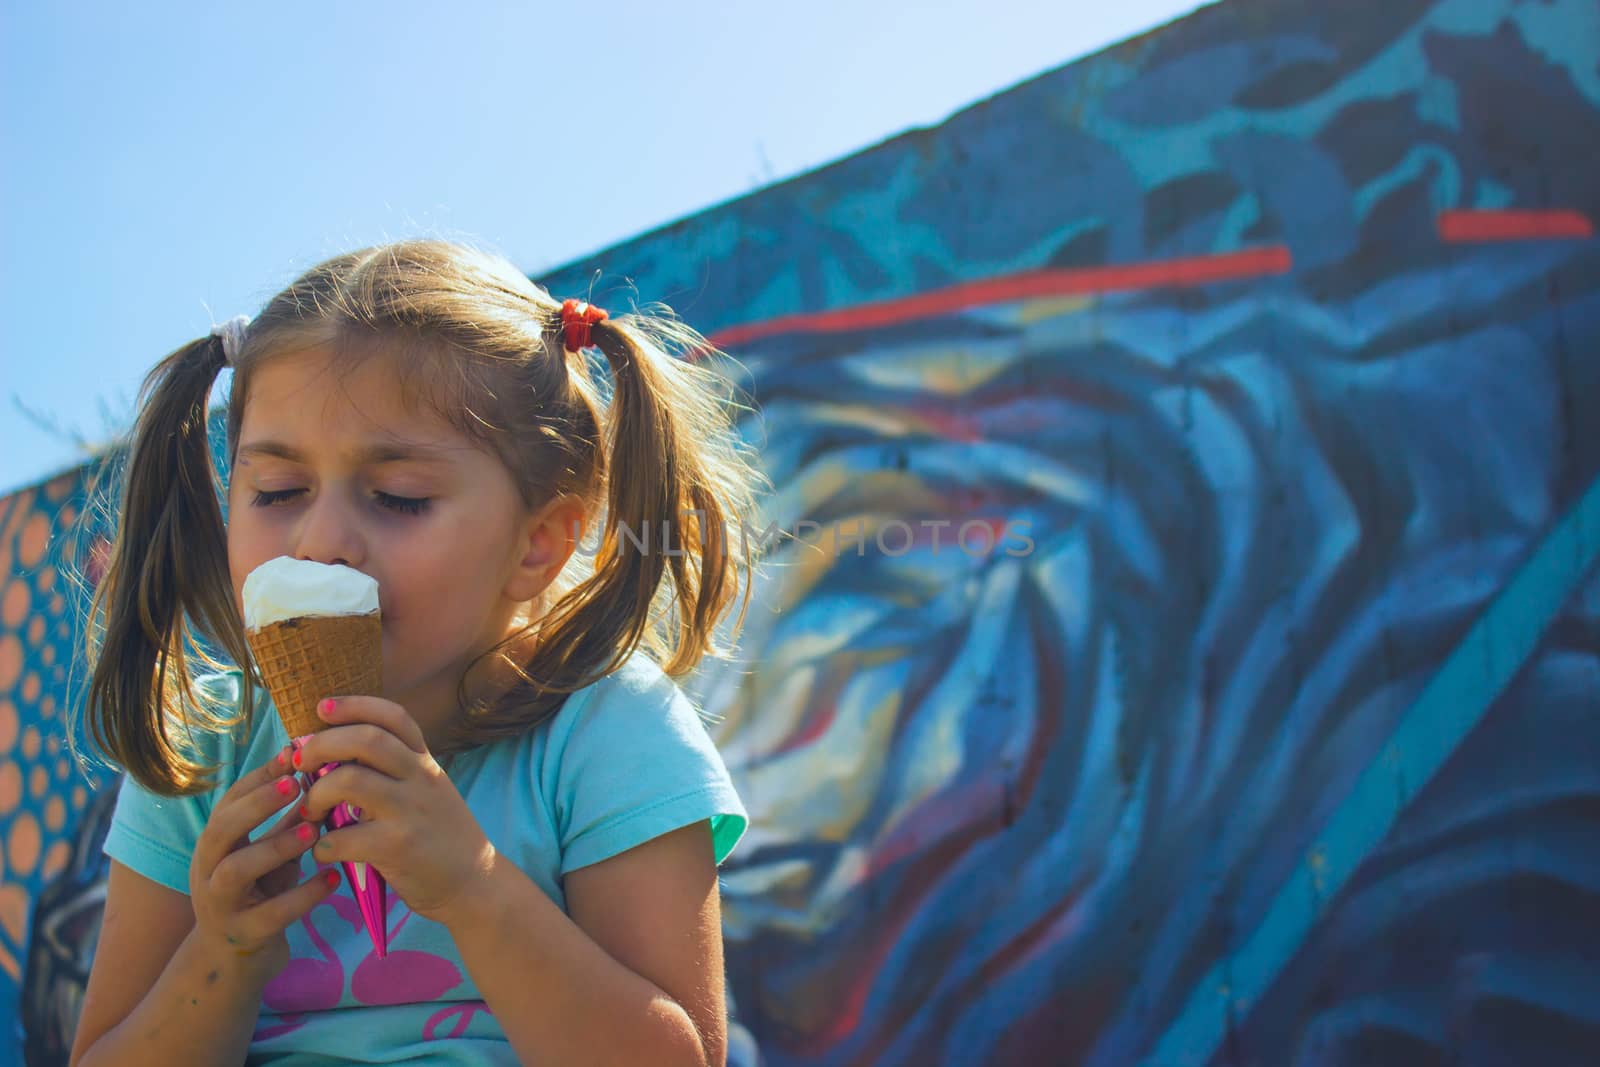 Little girl eating ice cream with her eyes closed, against blue wall